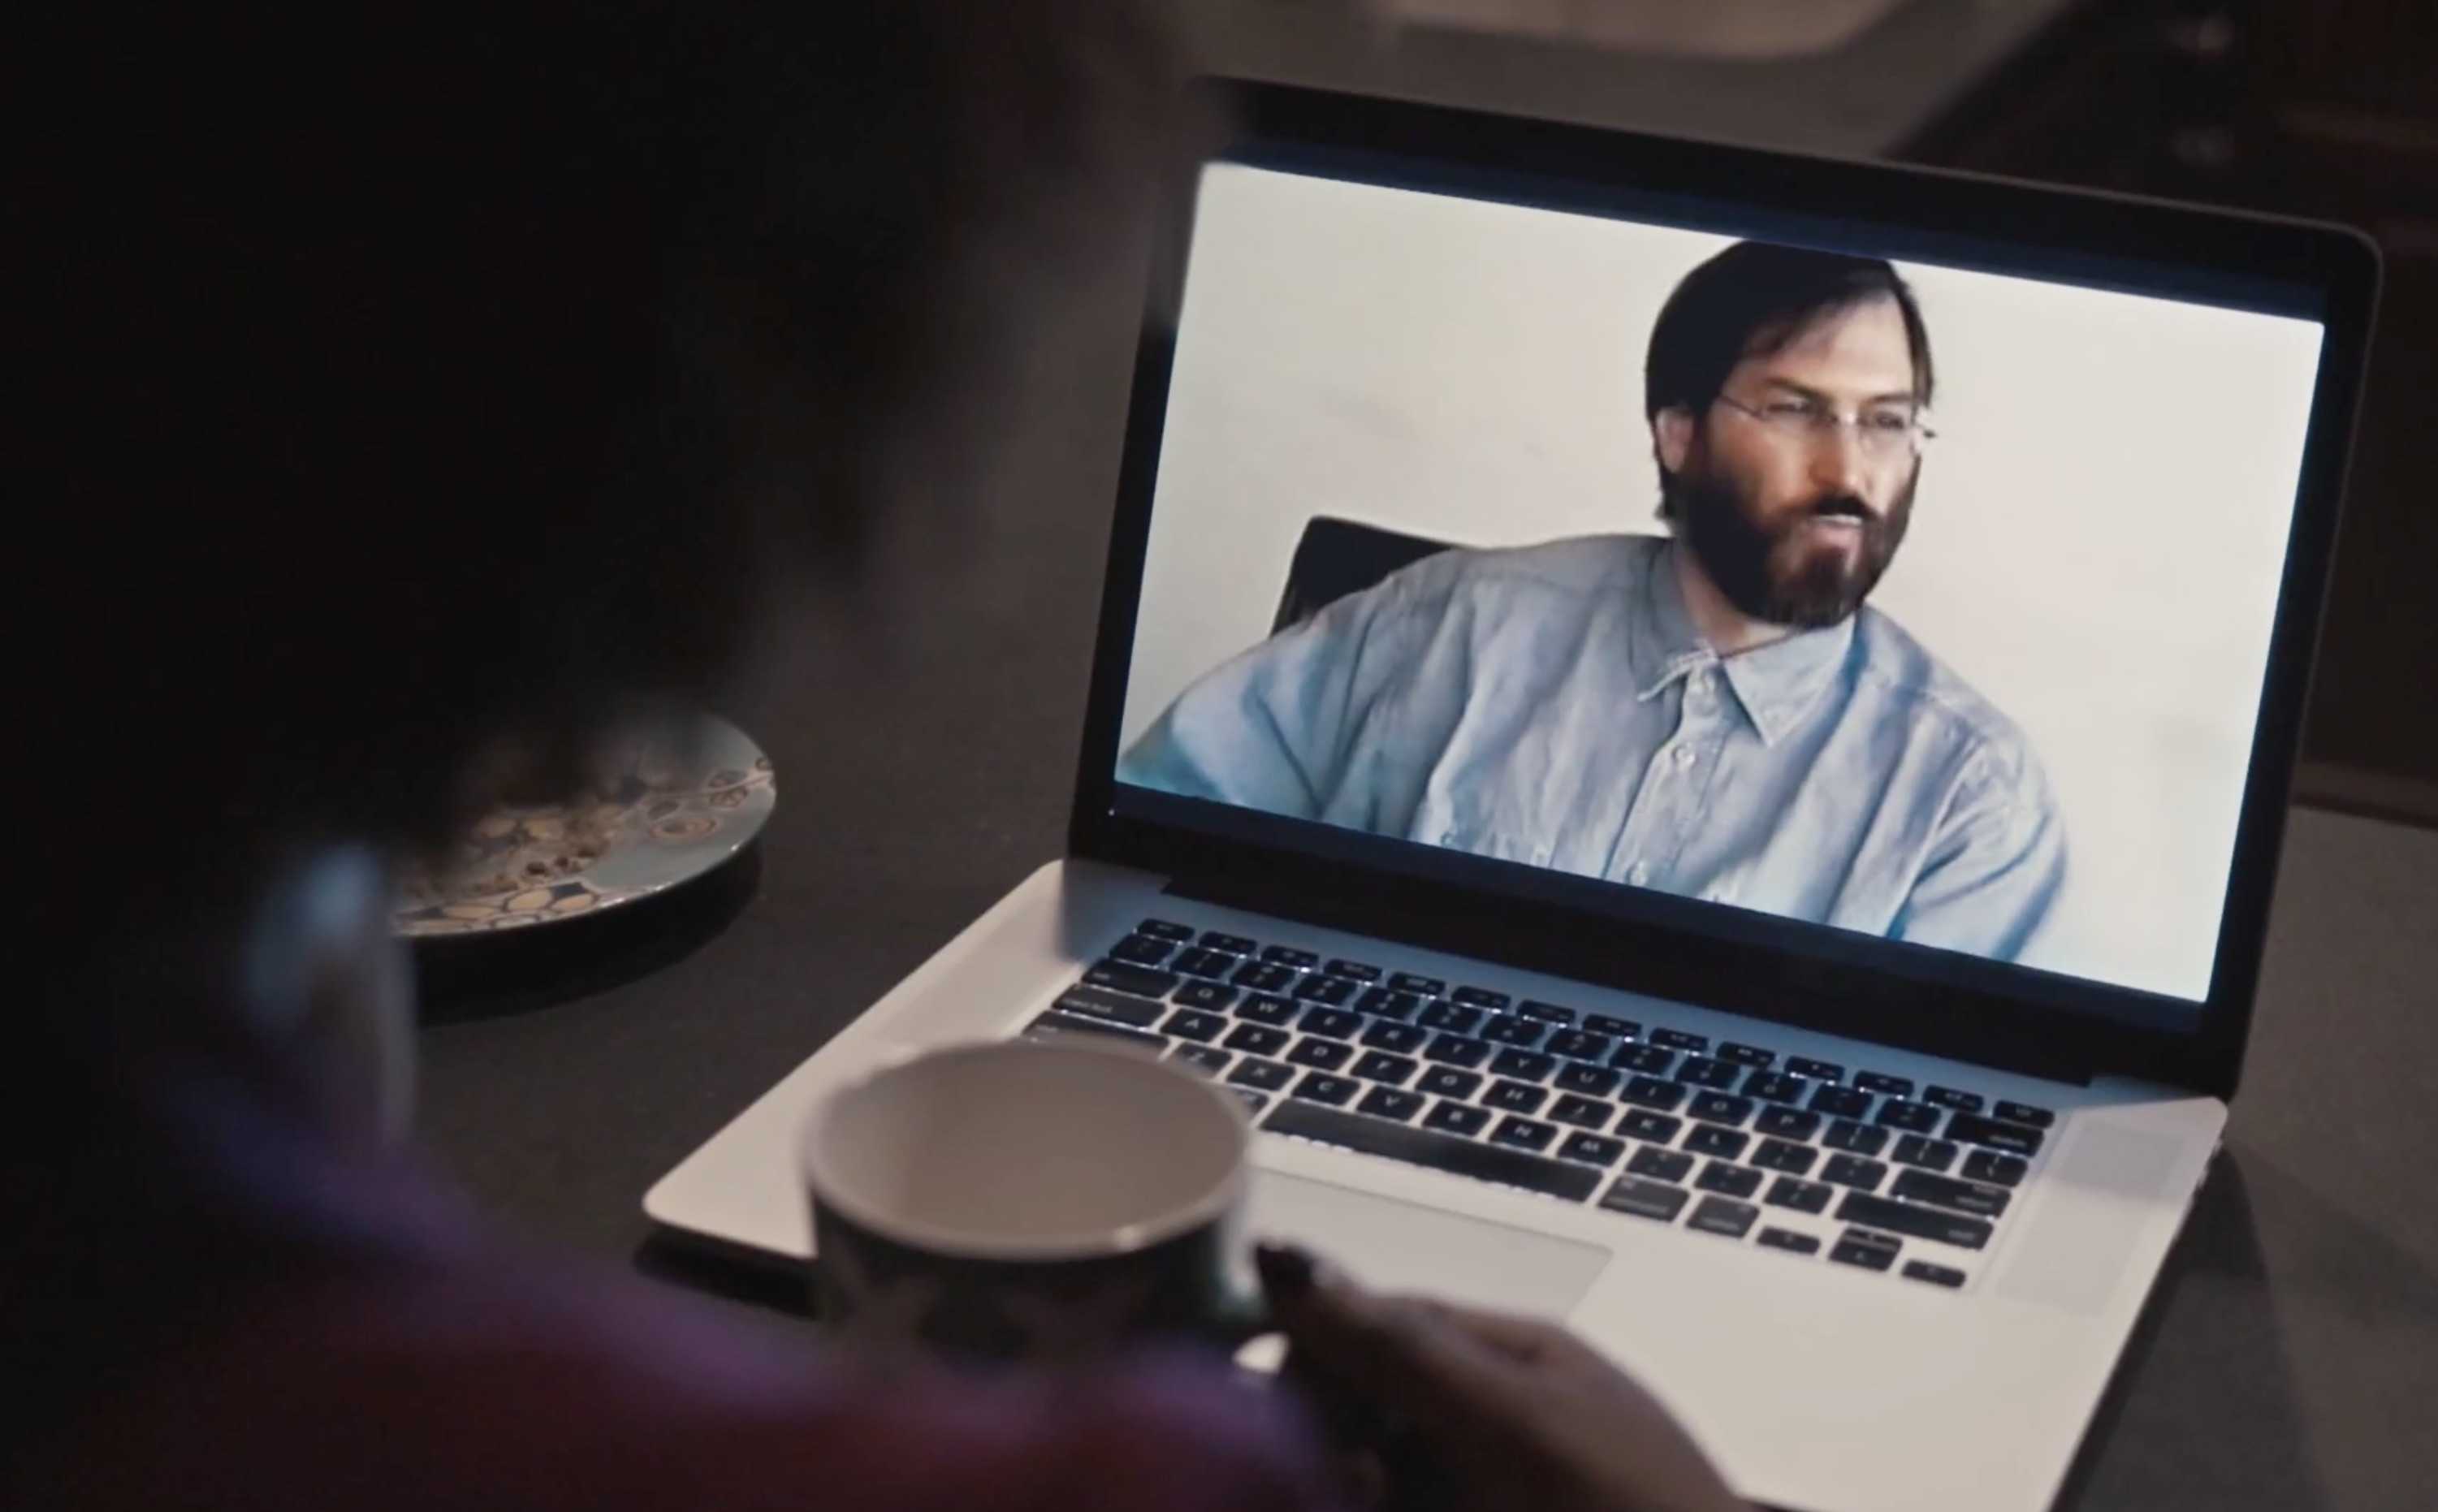 Steve Jobs is the star of the government's new ad campaign.